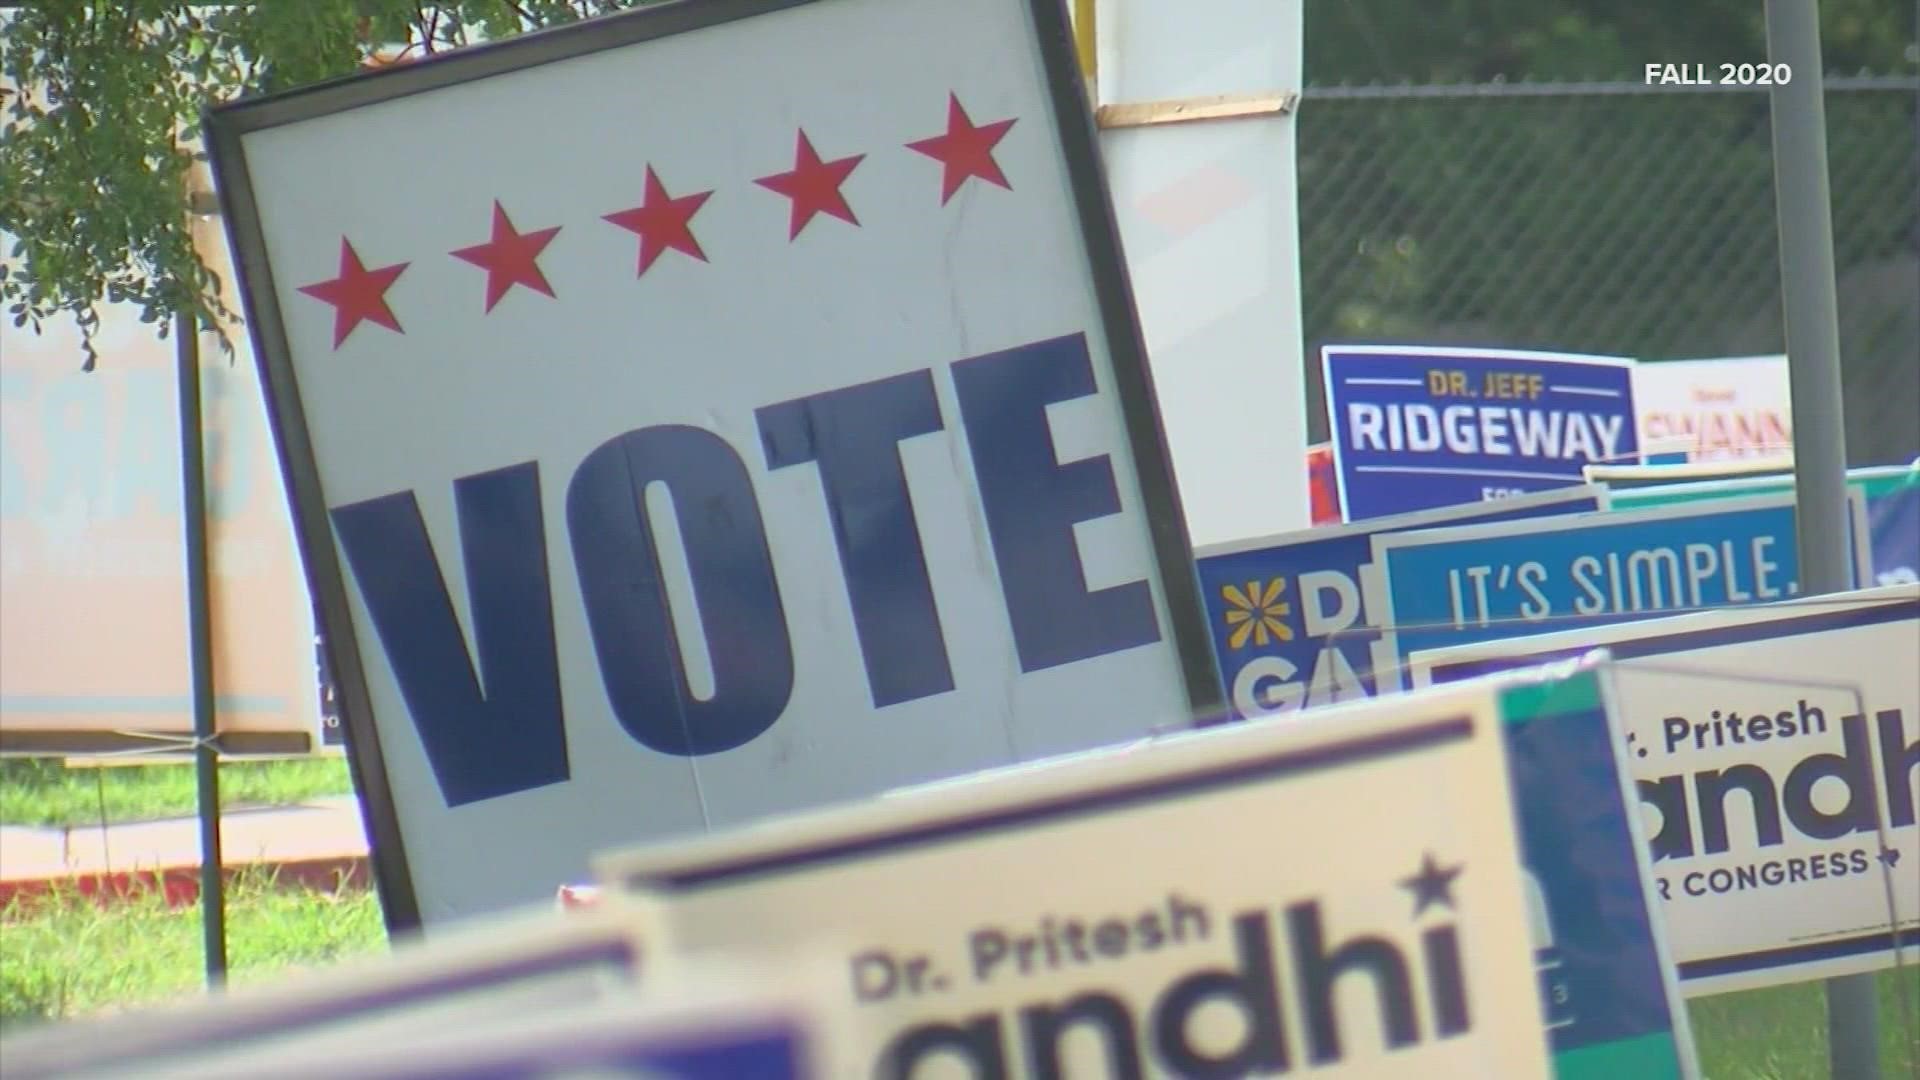 Voters will cast their ballots for 8 propositions on November 2. Adam Bennett breaks down two amendments that result from the pandemic.